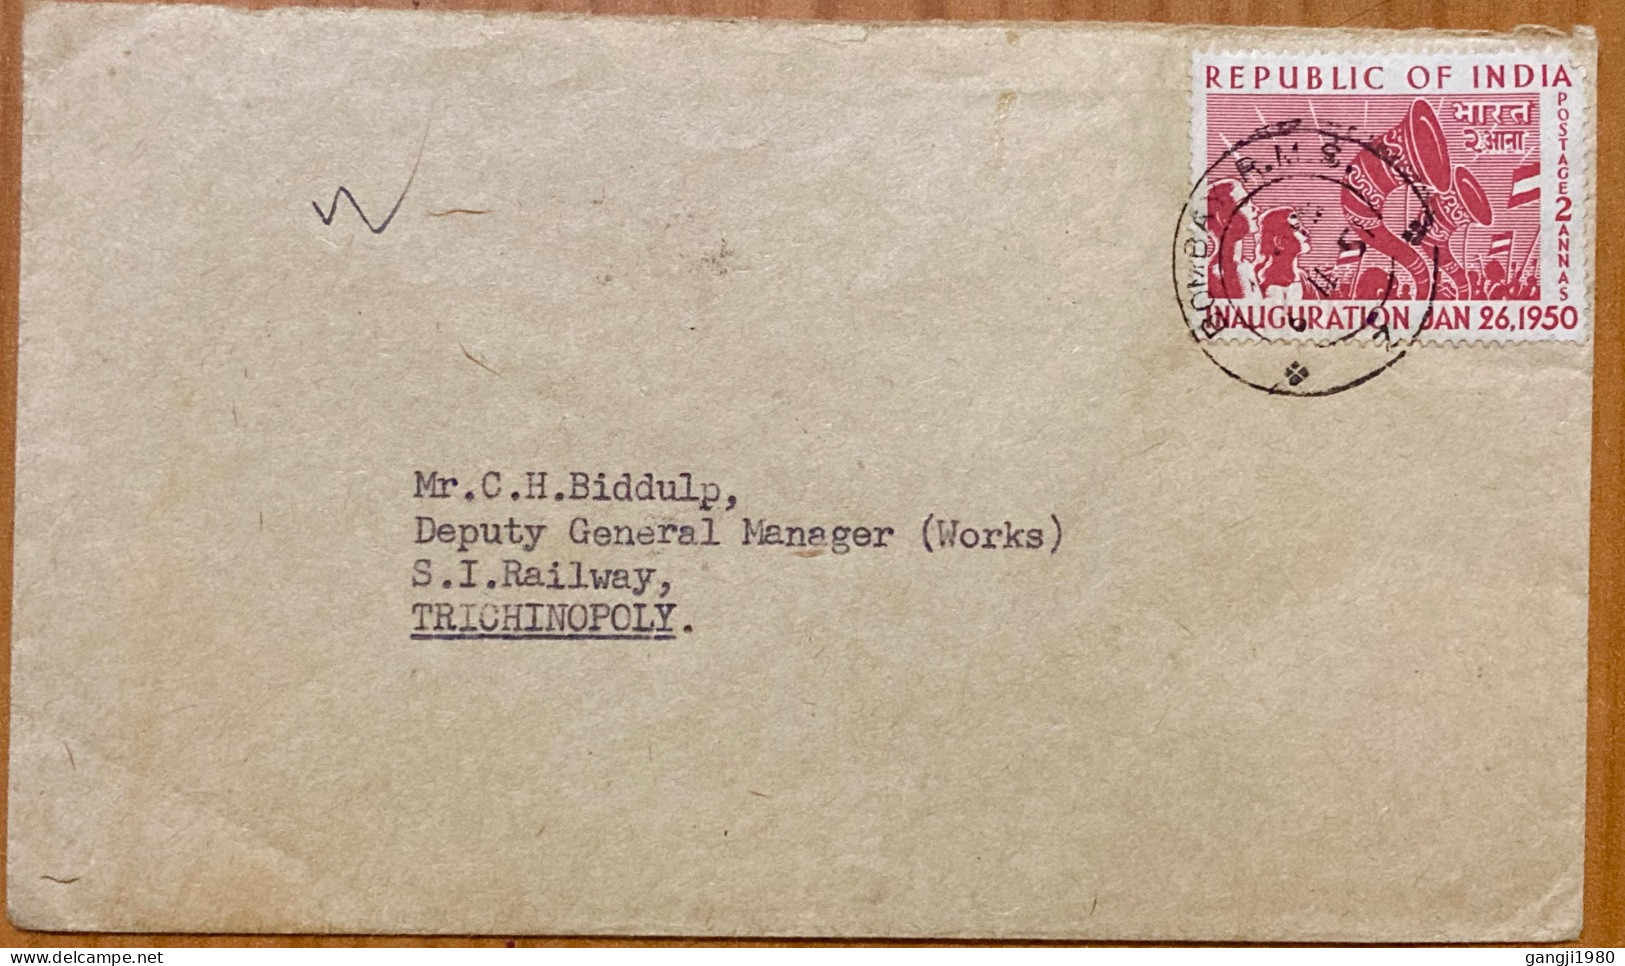 INDIA 1951, COVER USED, RARE PICTURE SLOGAN, CENSUS OF INDIA, REPUBLIC STAMP, TIRUCHIRAPALLY CITY CANCEL. - Covers & Documents